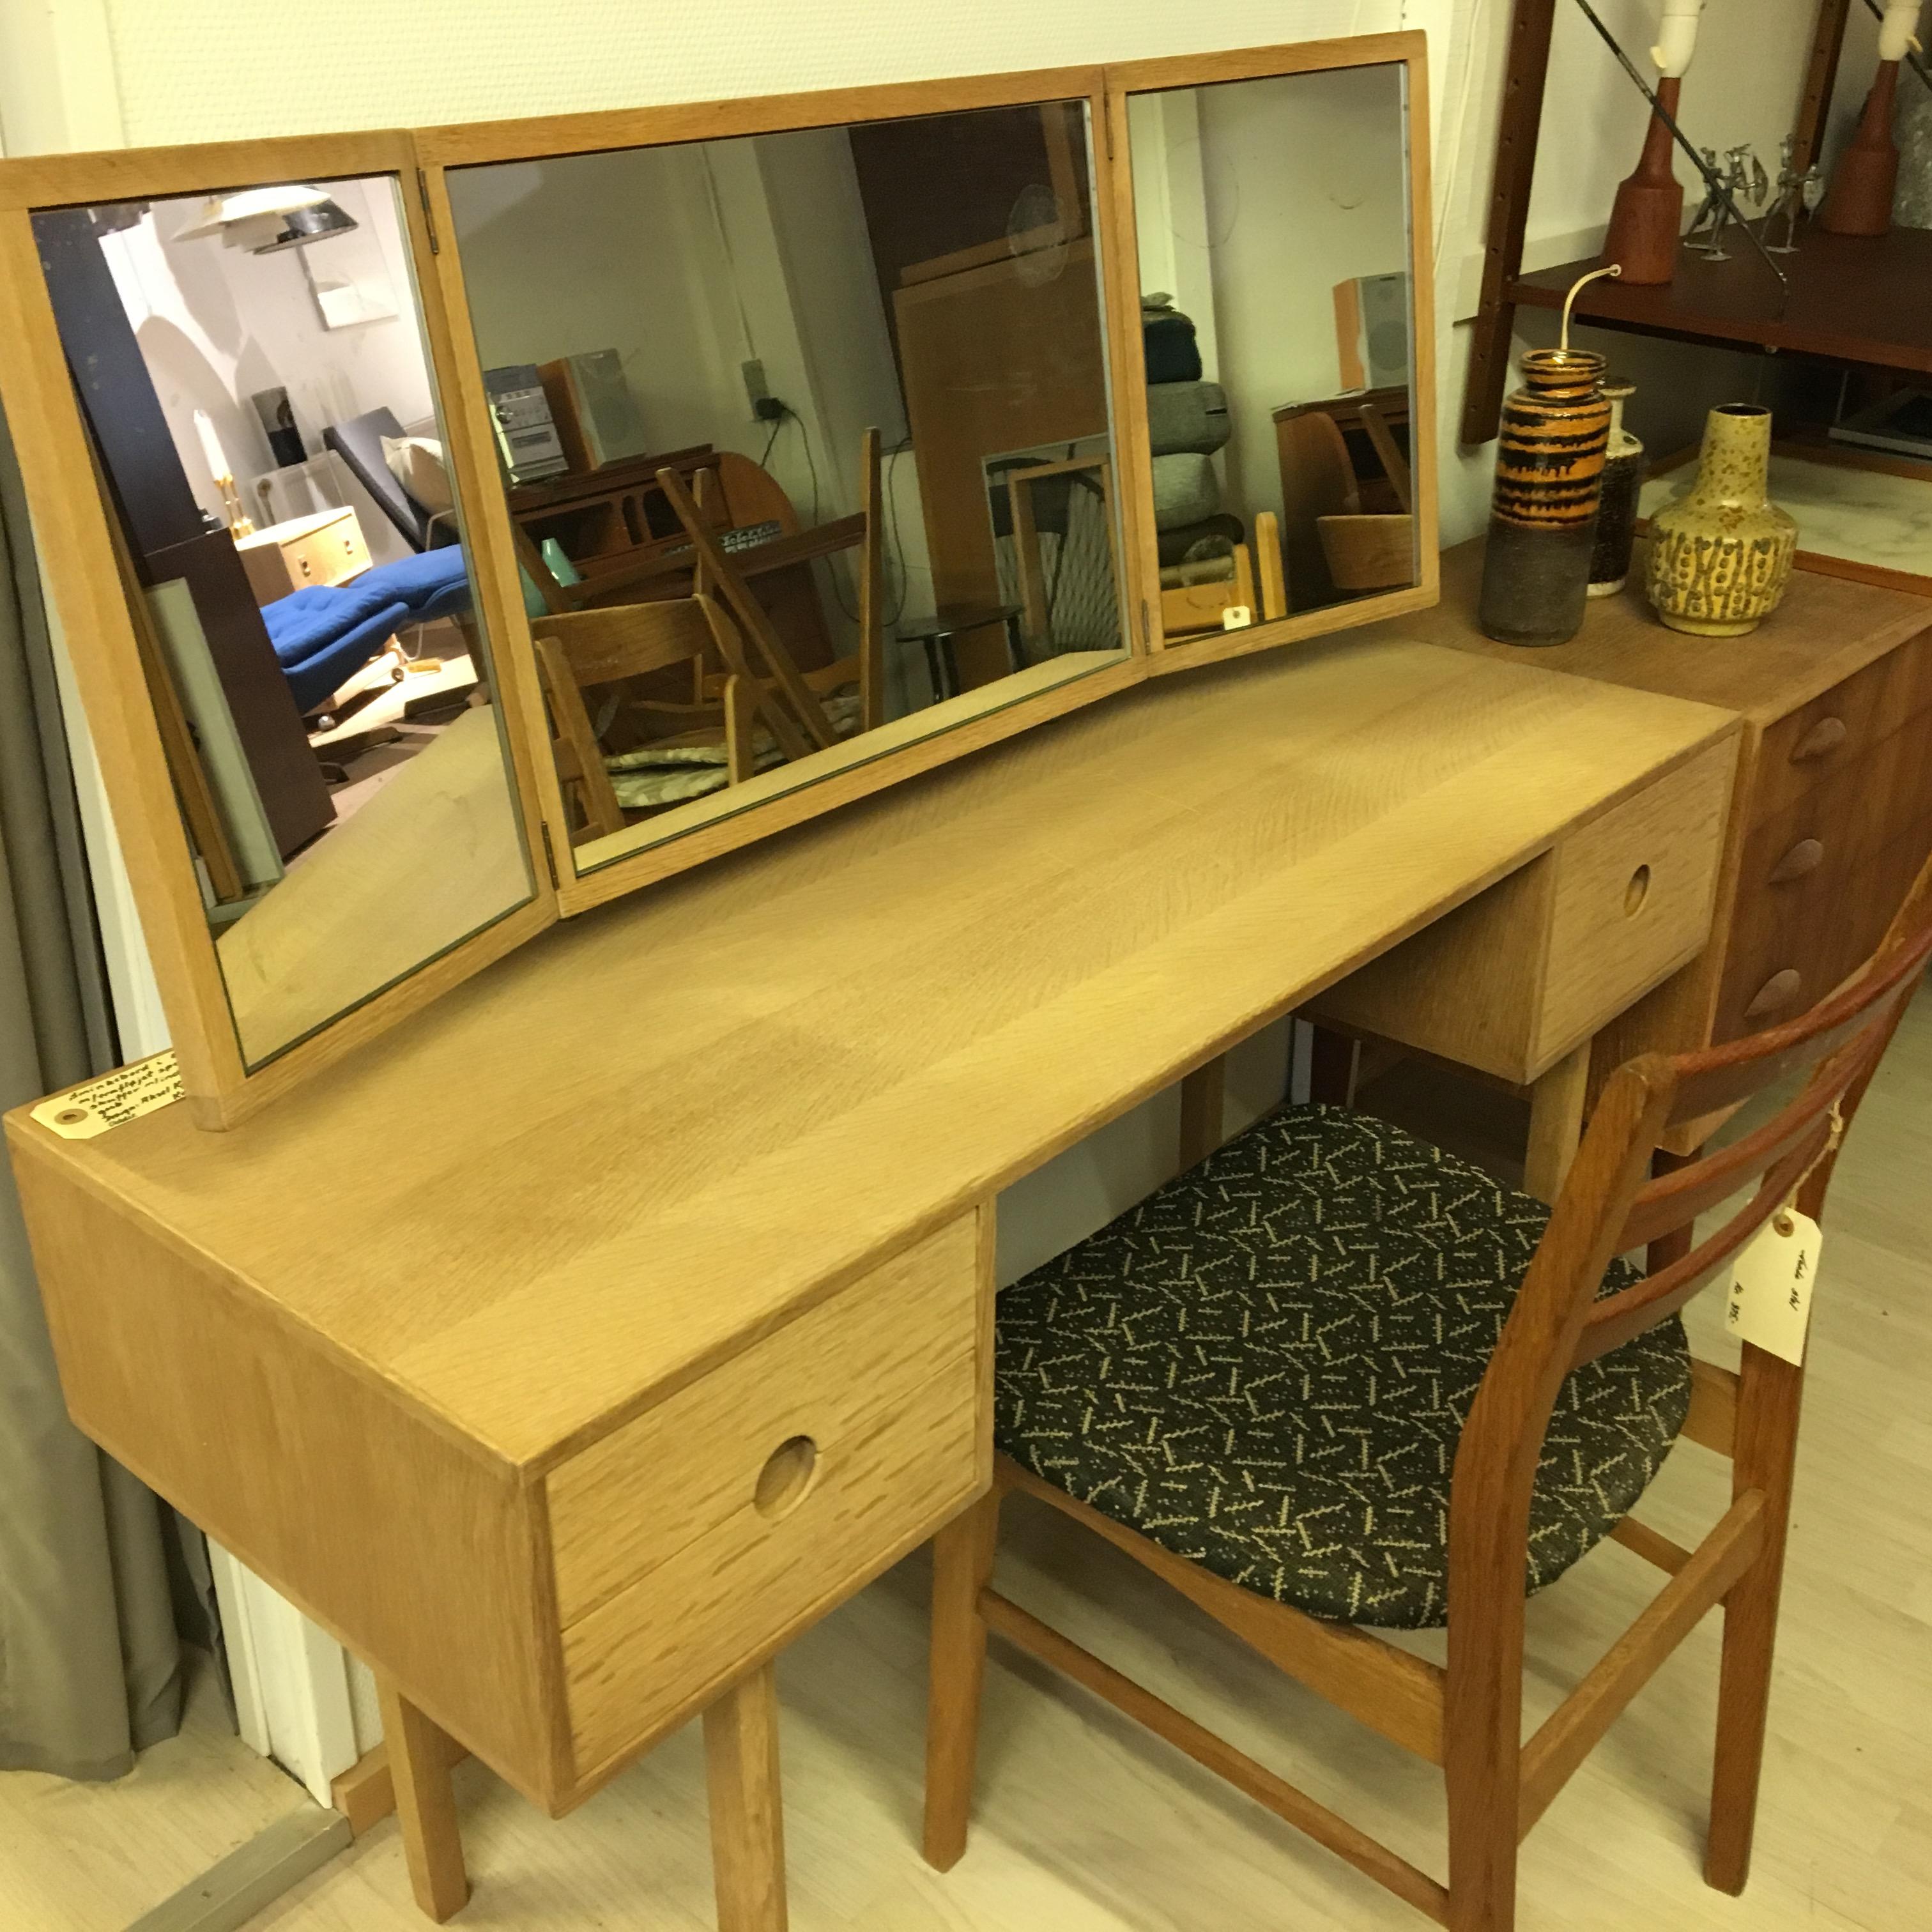 Midcentury, dressing table by Aksel Kjersgaard, 1960s.
Dressing table / Toilet furniture in oak with 3-wing adjustable and folding mirrors.
3 drawers in the front coated with felt in the bottom and with circular inset grip. Under the worktop a